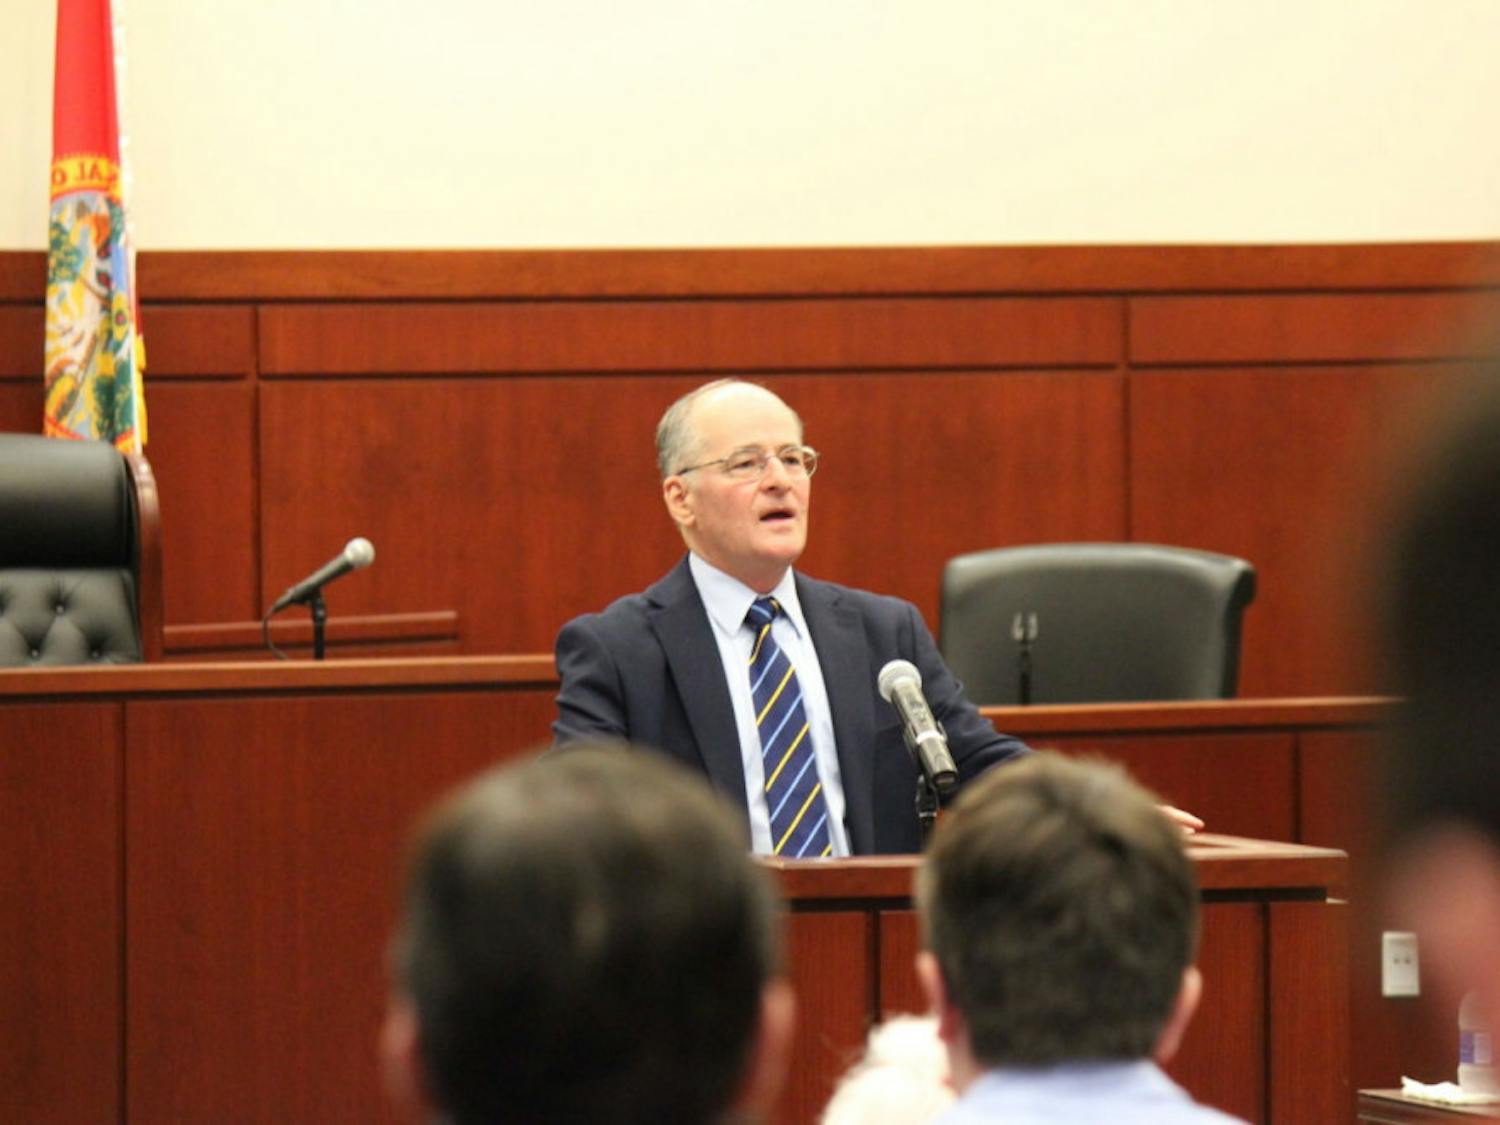 Florida Supreme Court Justice Charles Canady talks to UF Law students about the decision making process in the courts.&nbsp;